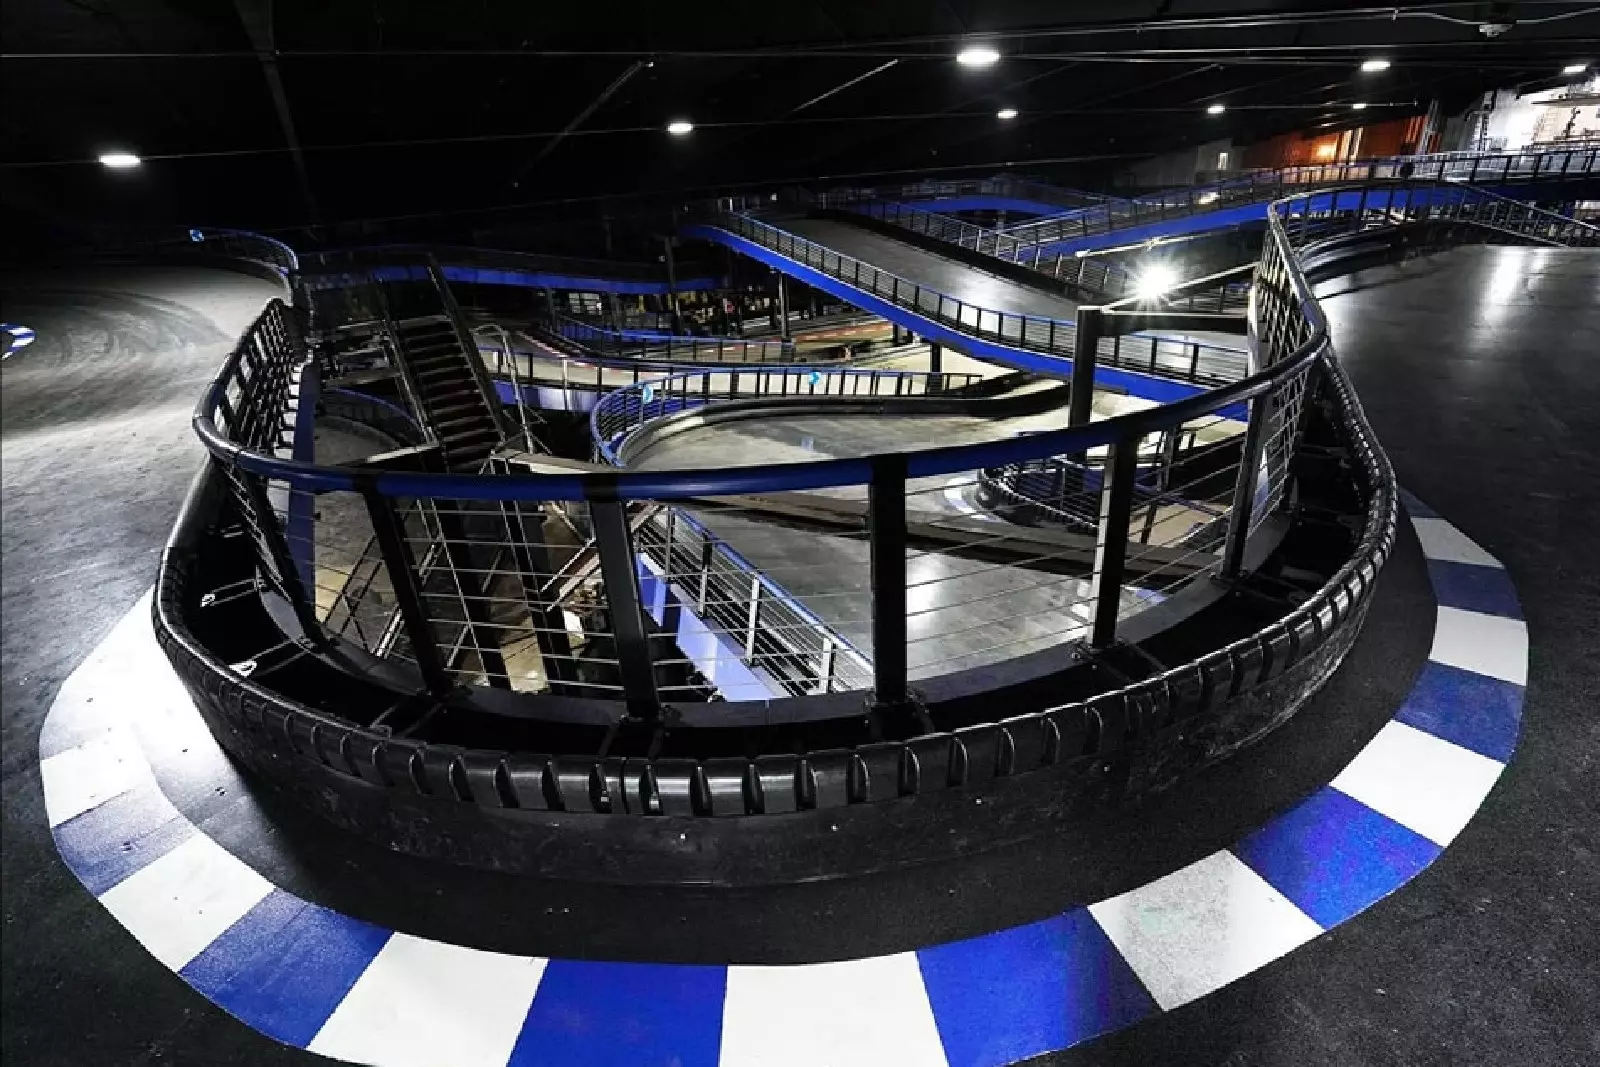 The world's largest go-kart track will open in NJ in December